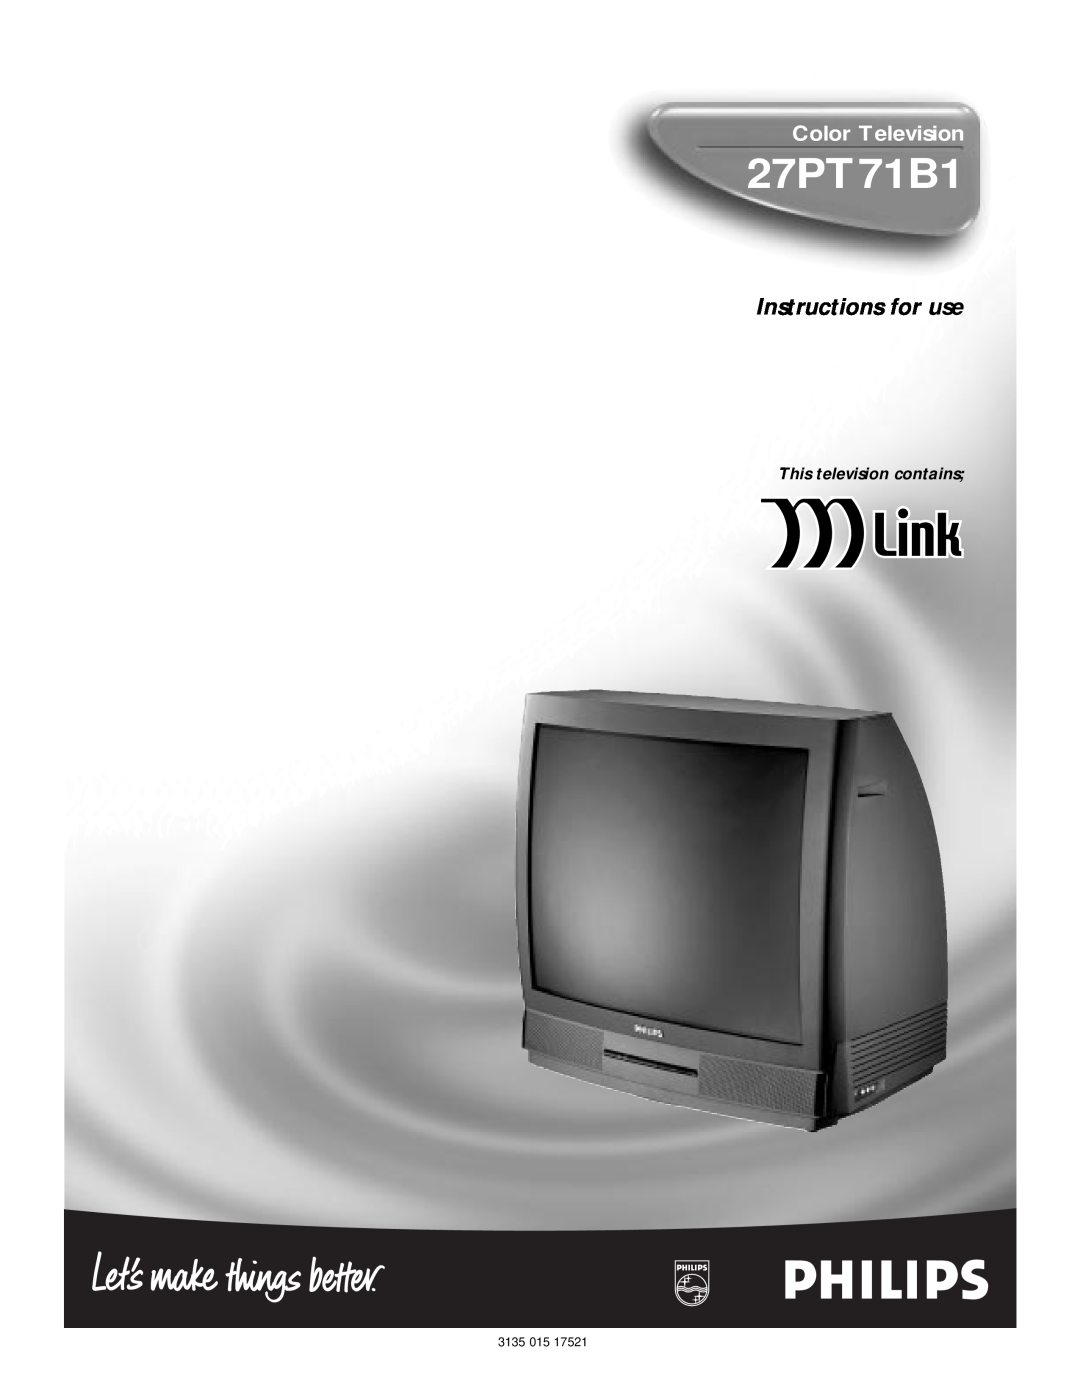 Philips 27PT71B1 manual Instructions for use, Color Television, This television contains, 3135 015 